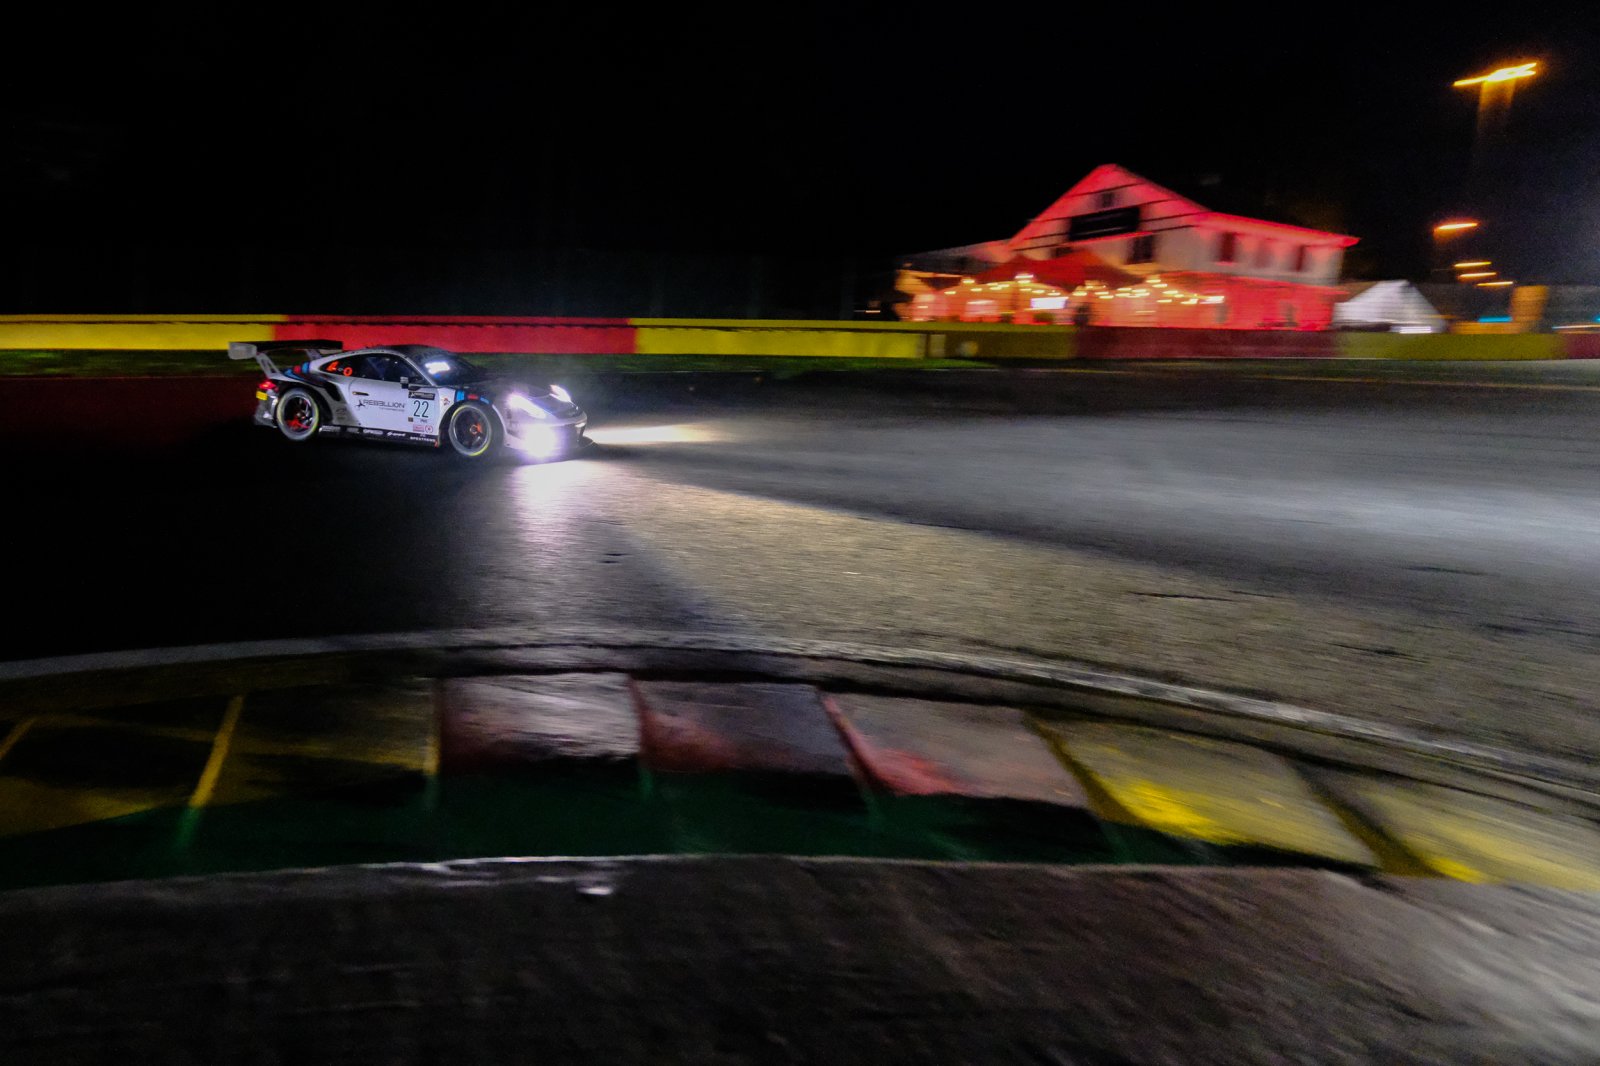 GPX Racing Porsche tops night practice at Spa-Francorchamps